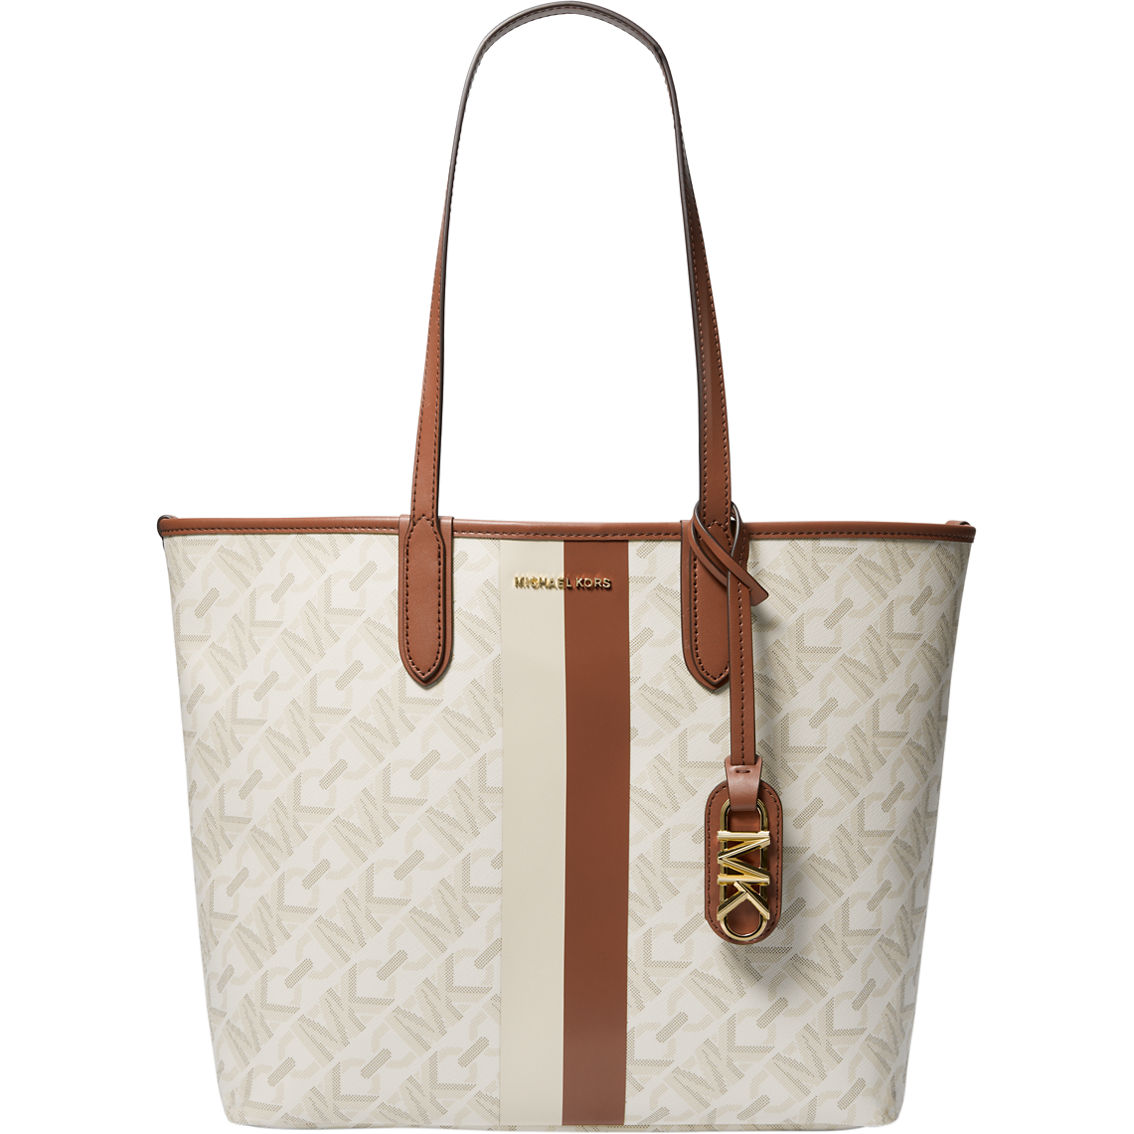 Michael Kors Eliza Large East West Open Tote - Image 1 of 4